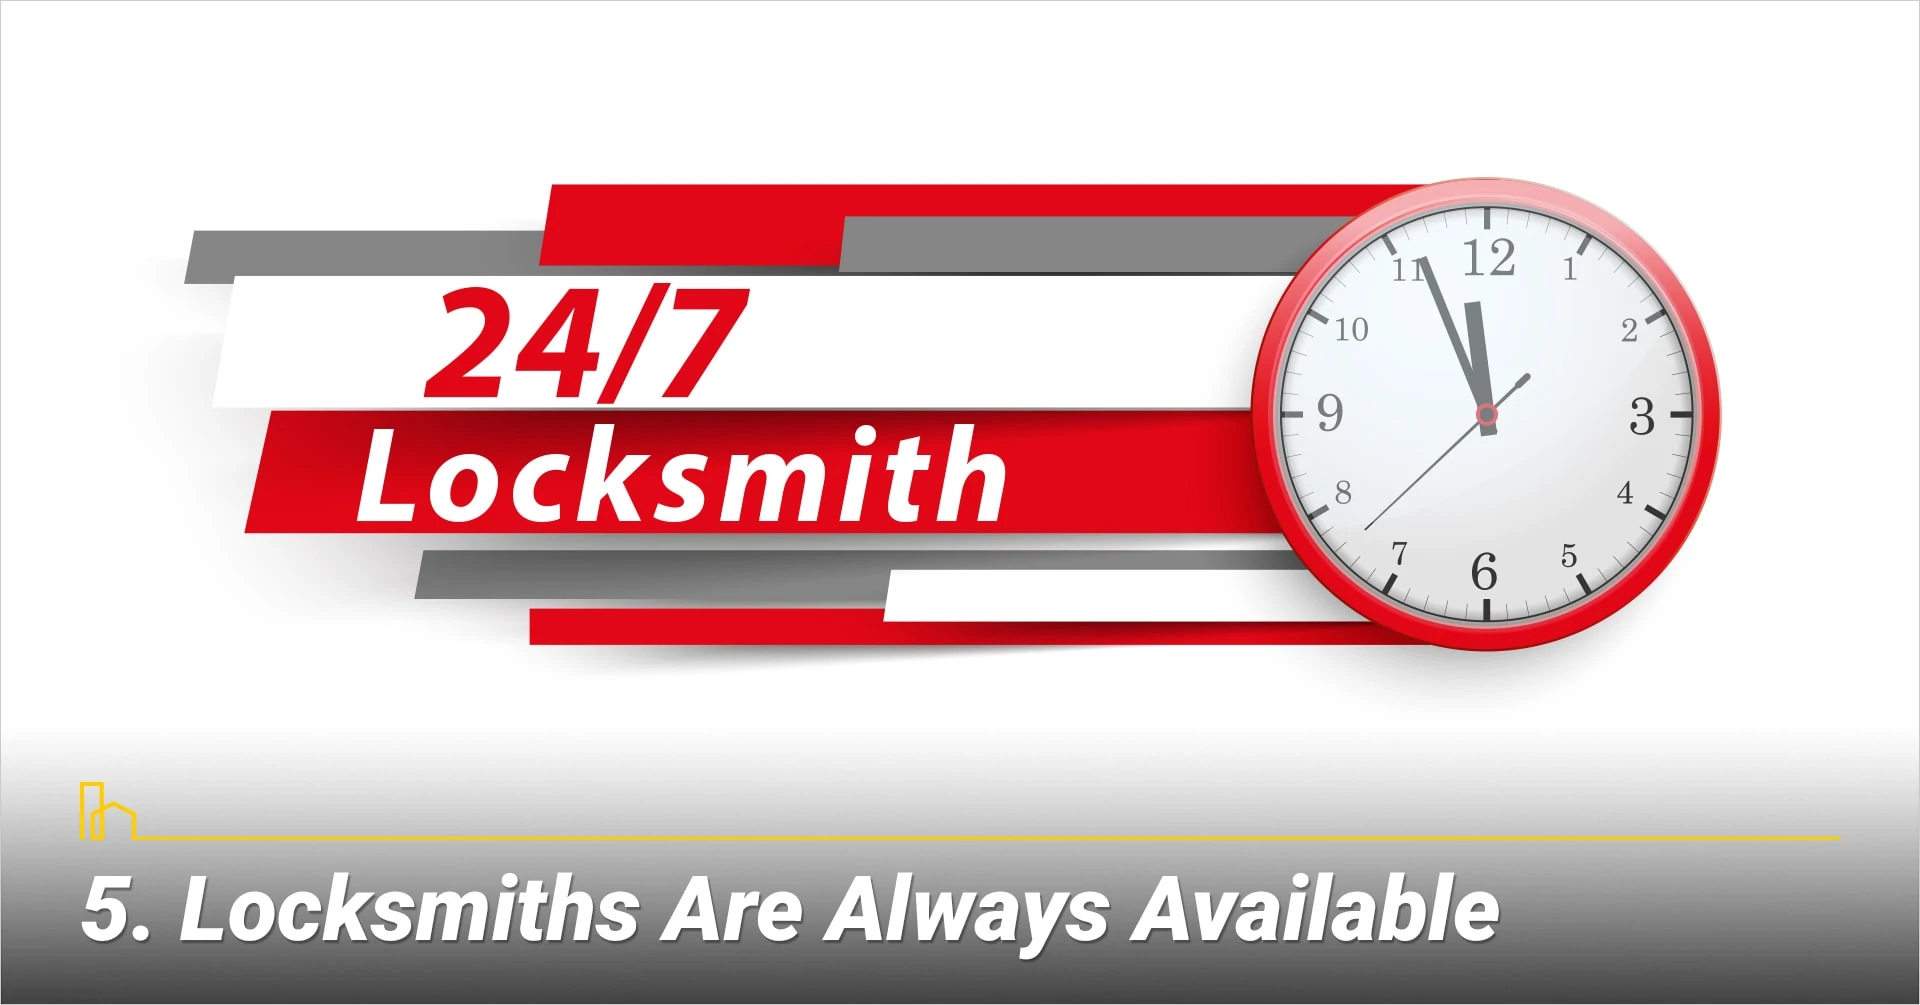 Locksmiths Are Always Available, they are available 24/7